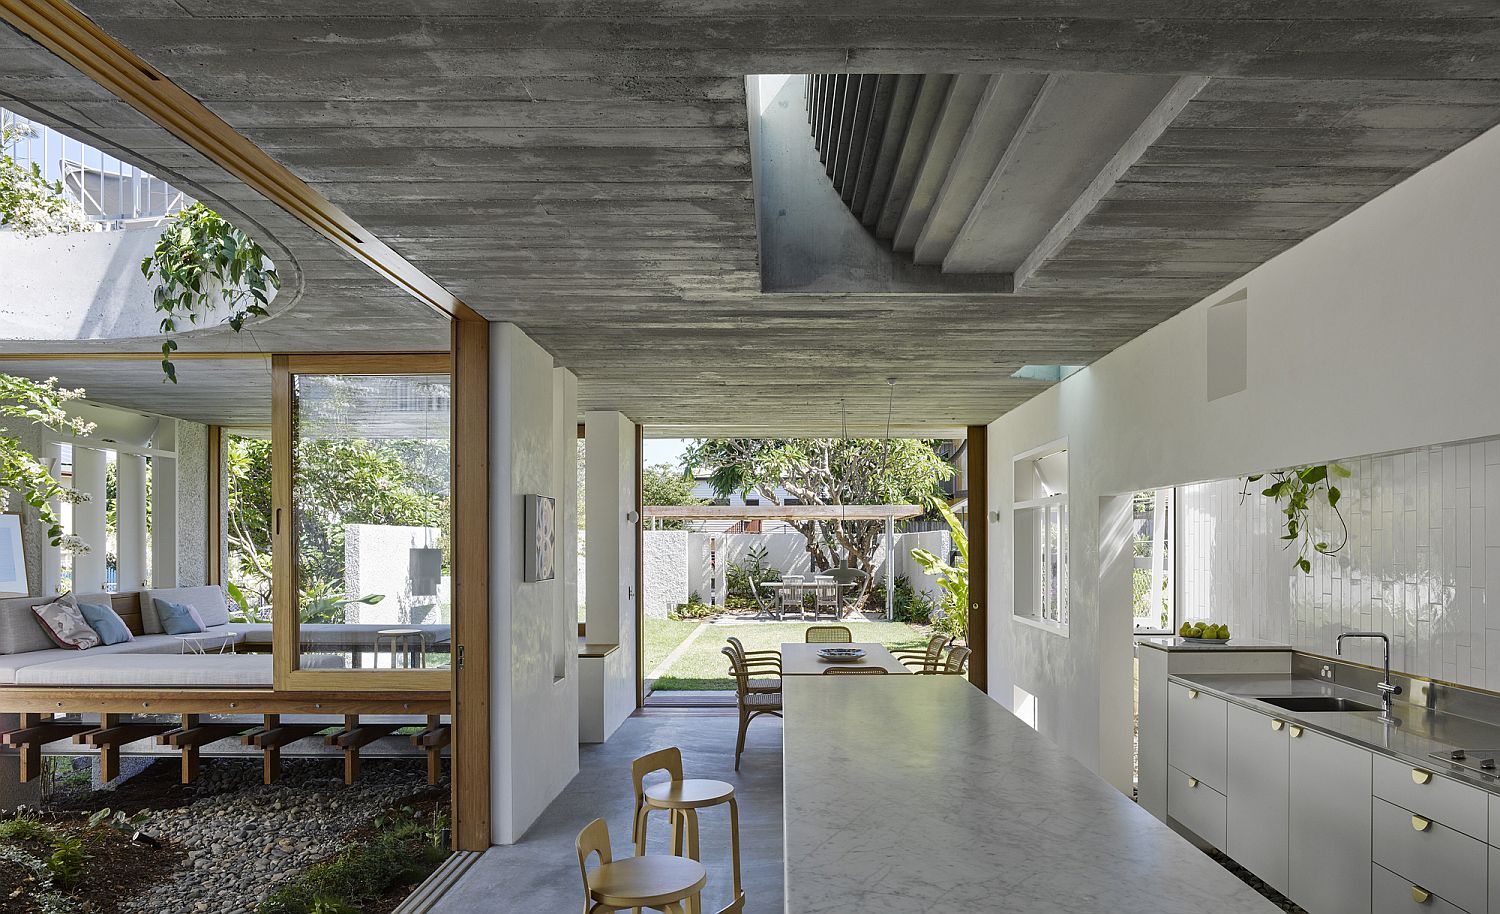 Series-of-concrete-walls-and-smart-extensions-shape-the-new-interior-of-the-Gibbon-Street